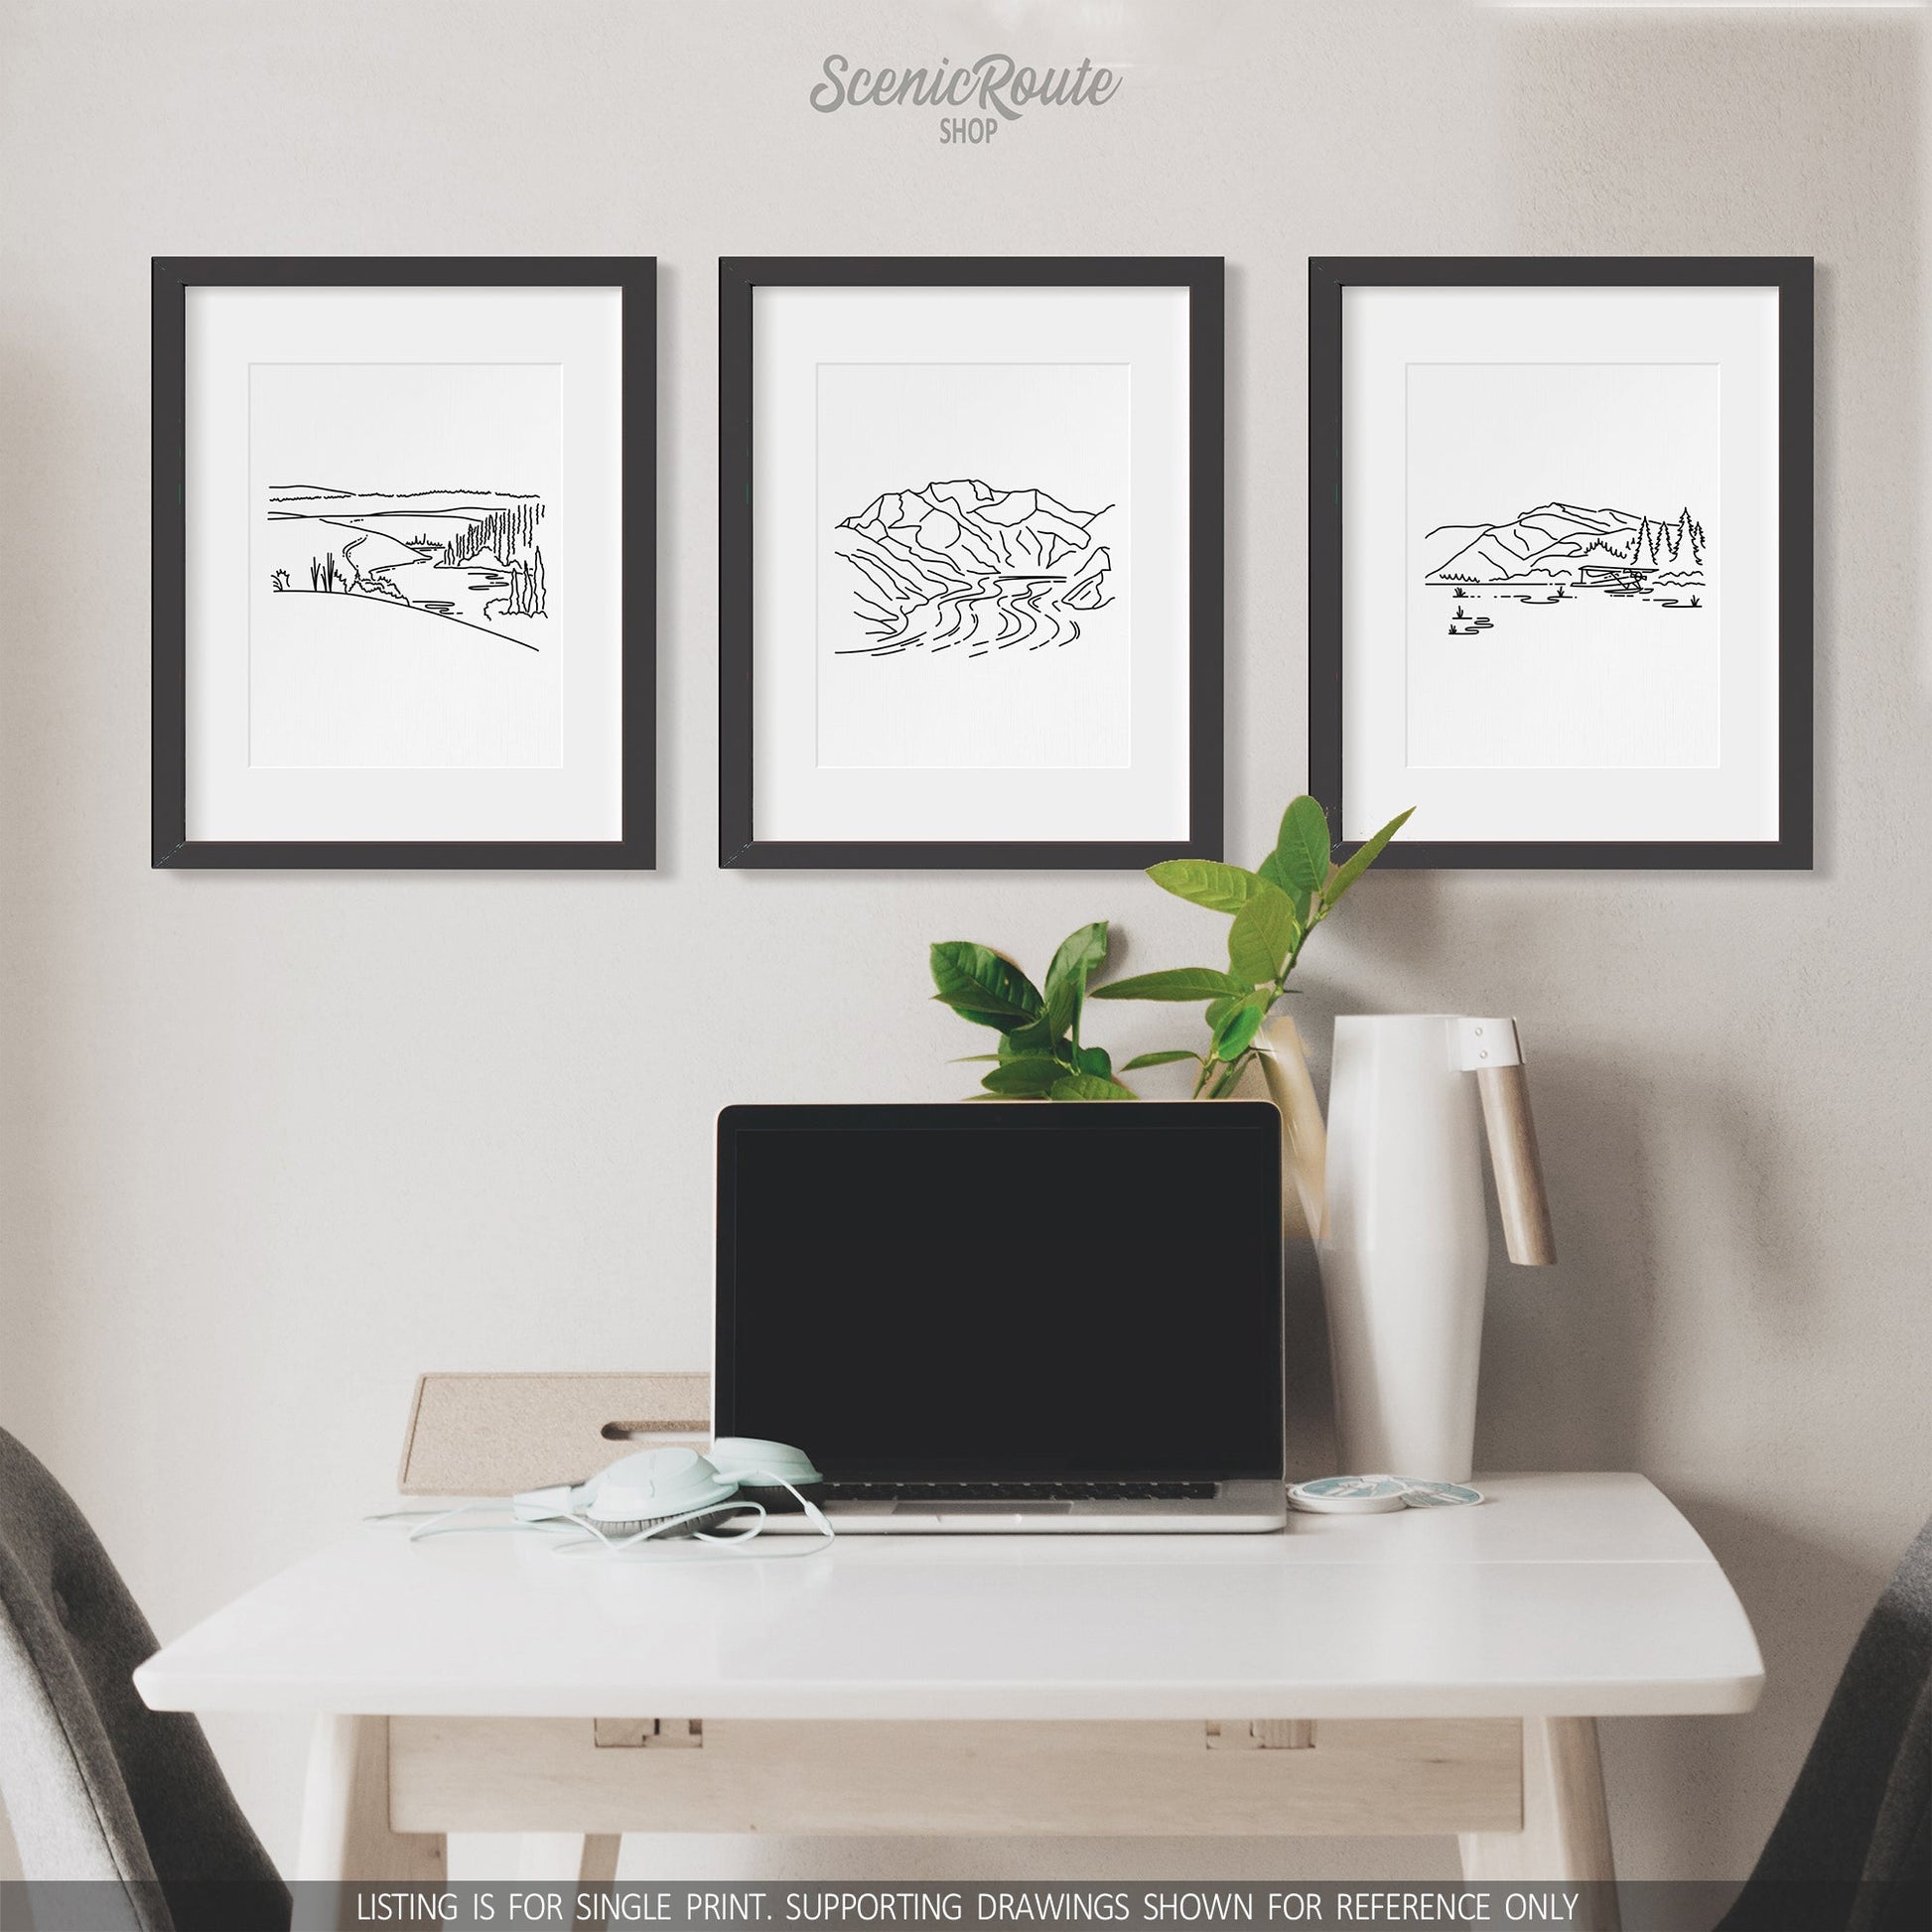 A group of three framed drawings on a wall above a desk with a laptop. The line art drawings include Kobuk Valley National Park, Wrangell Saint Elias National Park, and Lake Clark National Park